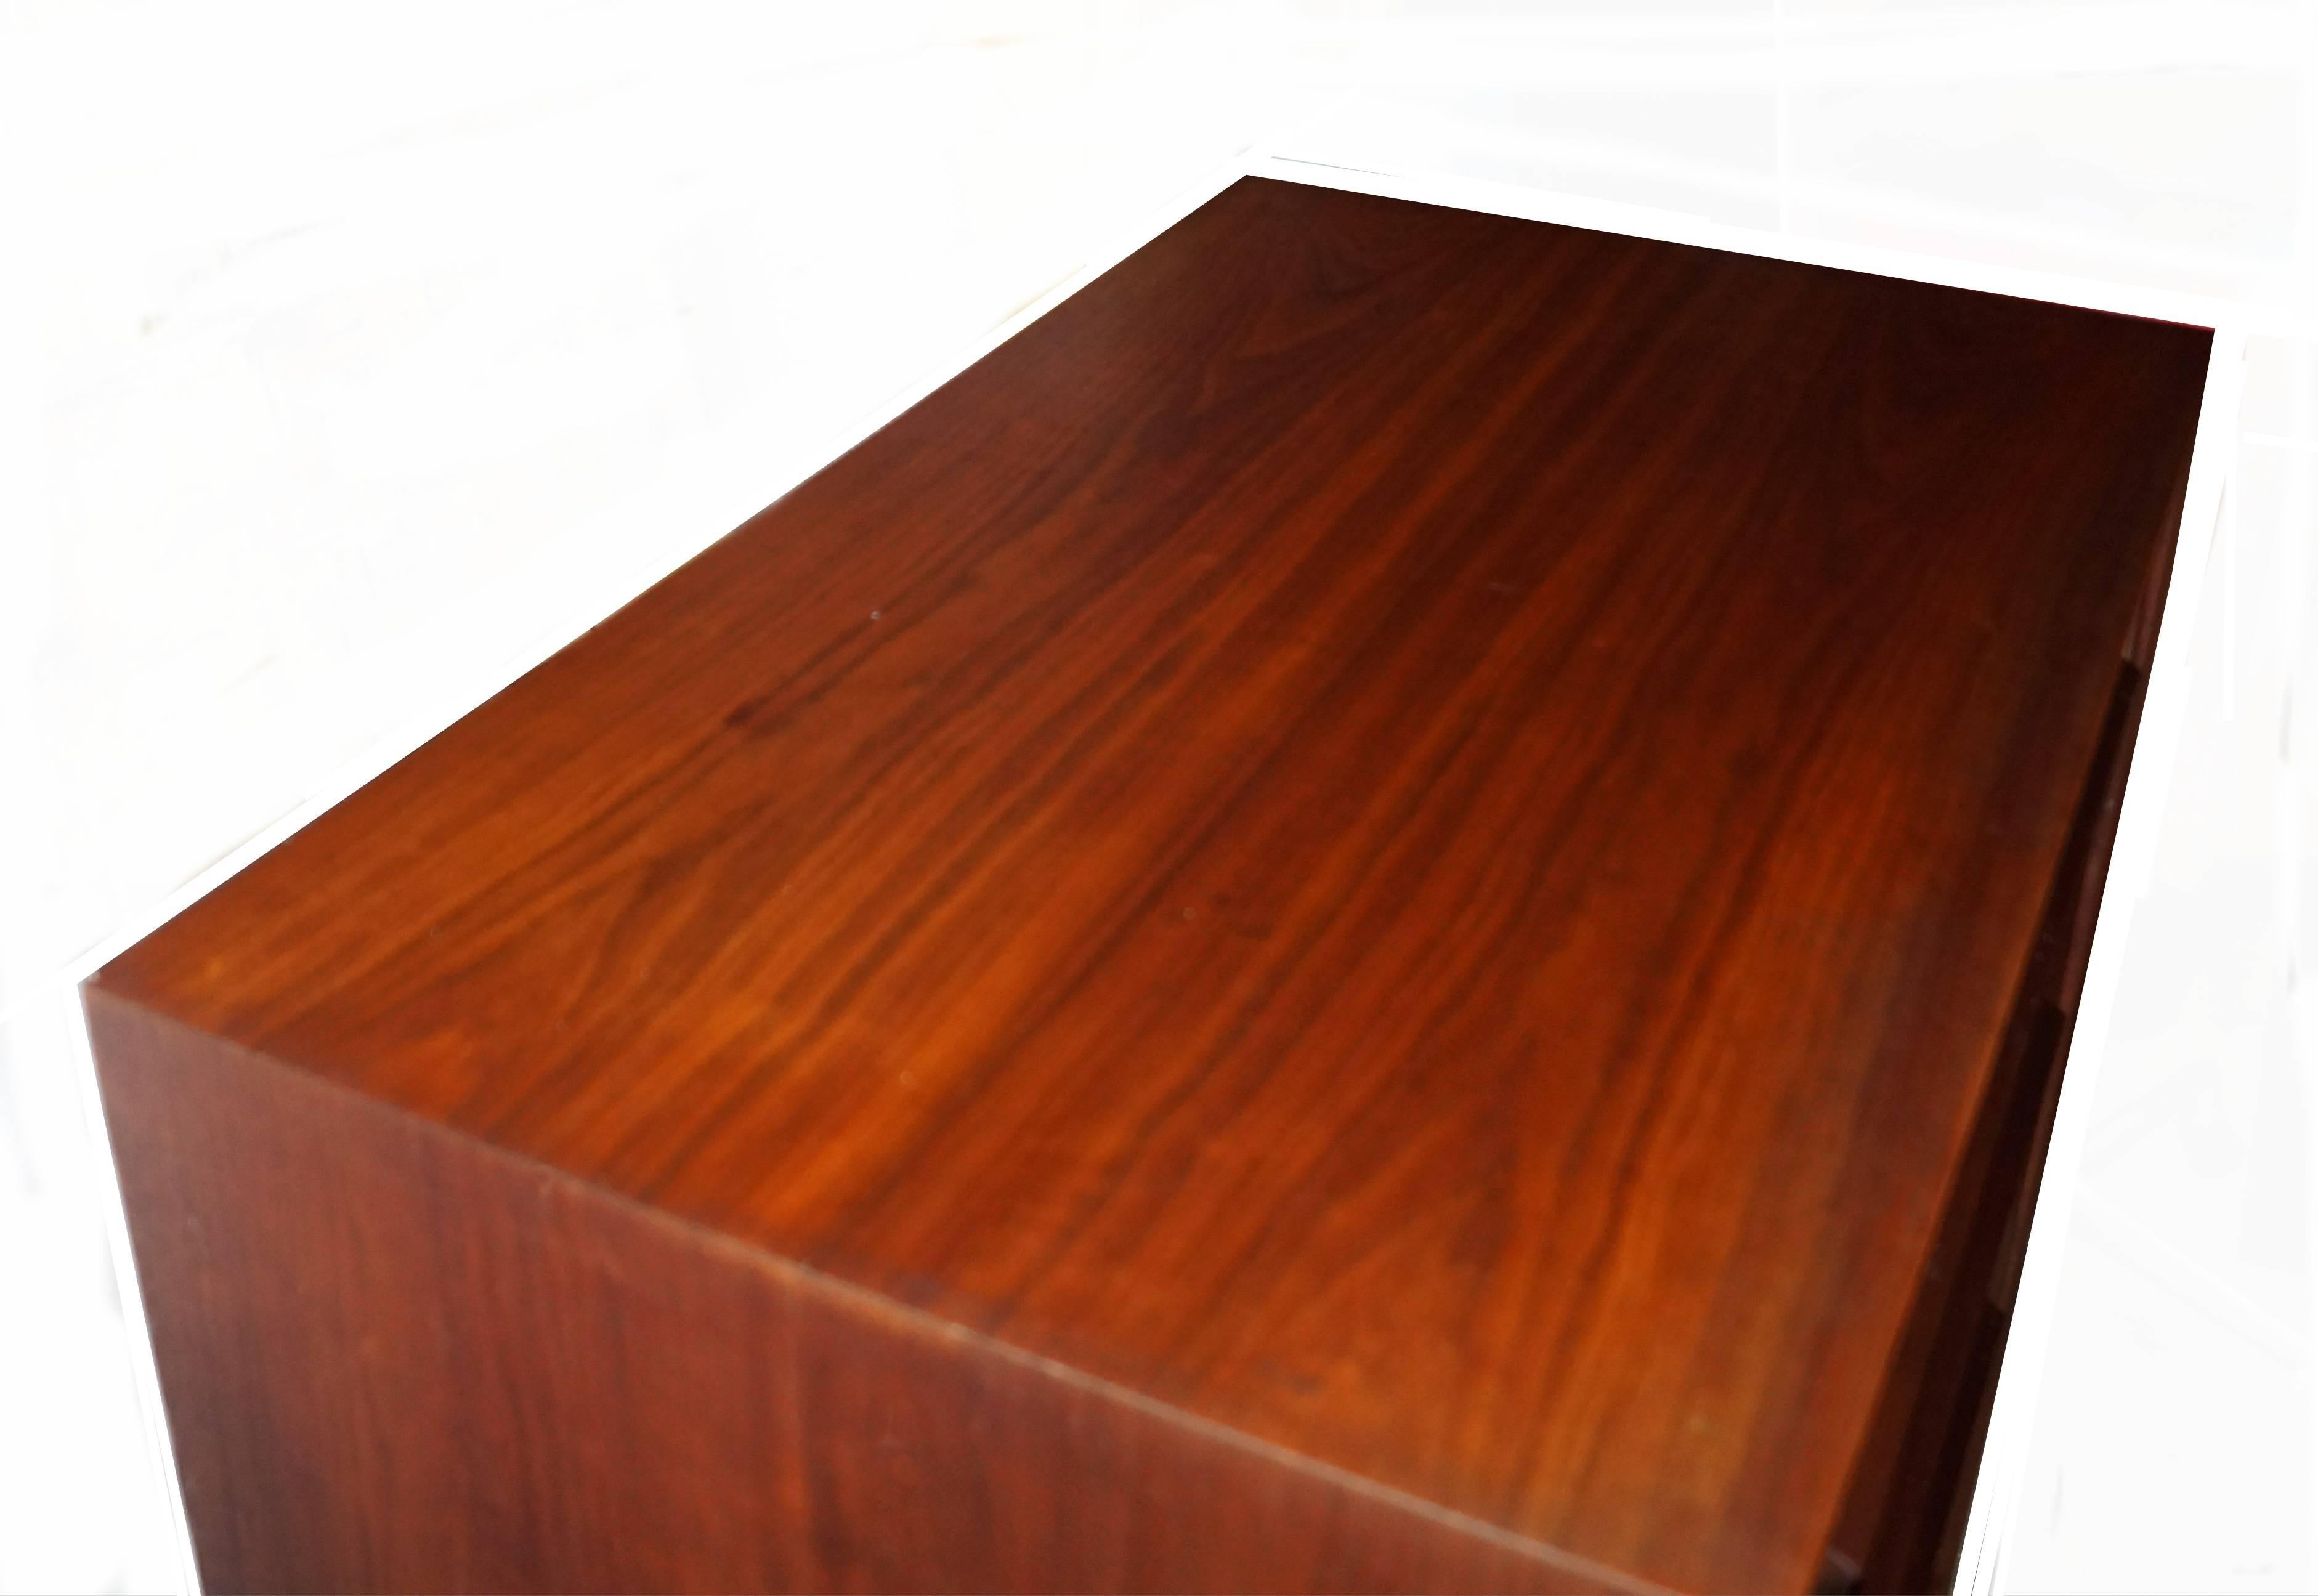 American Widdicomb Sculpted Highboy Chest of Drawers Dresser Manner of George Nakashima